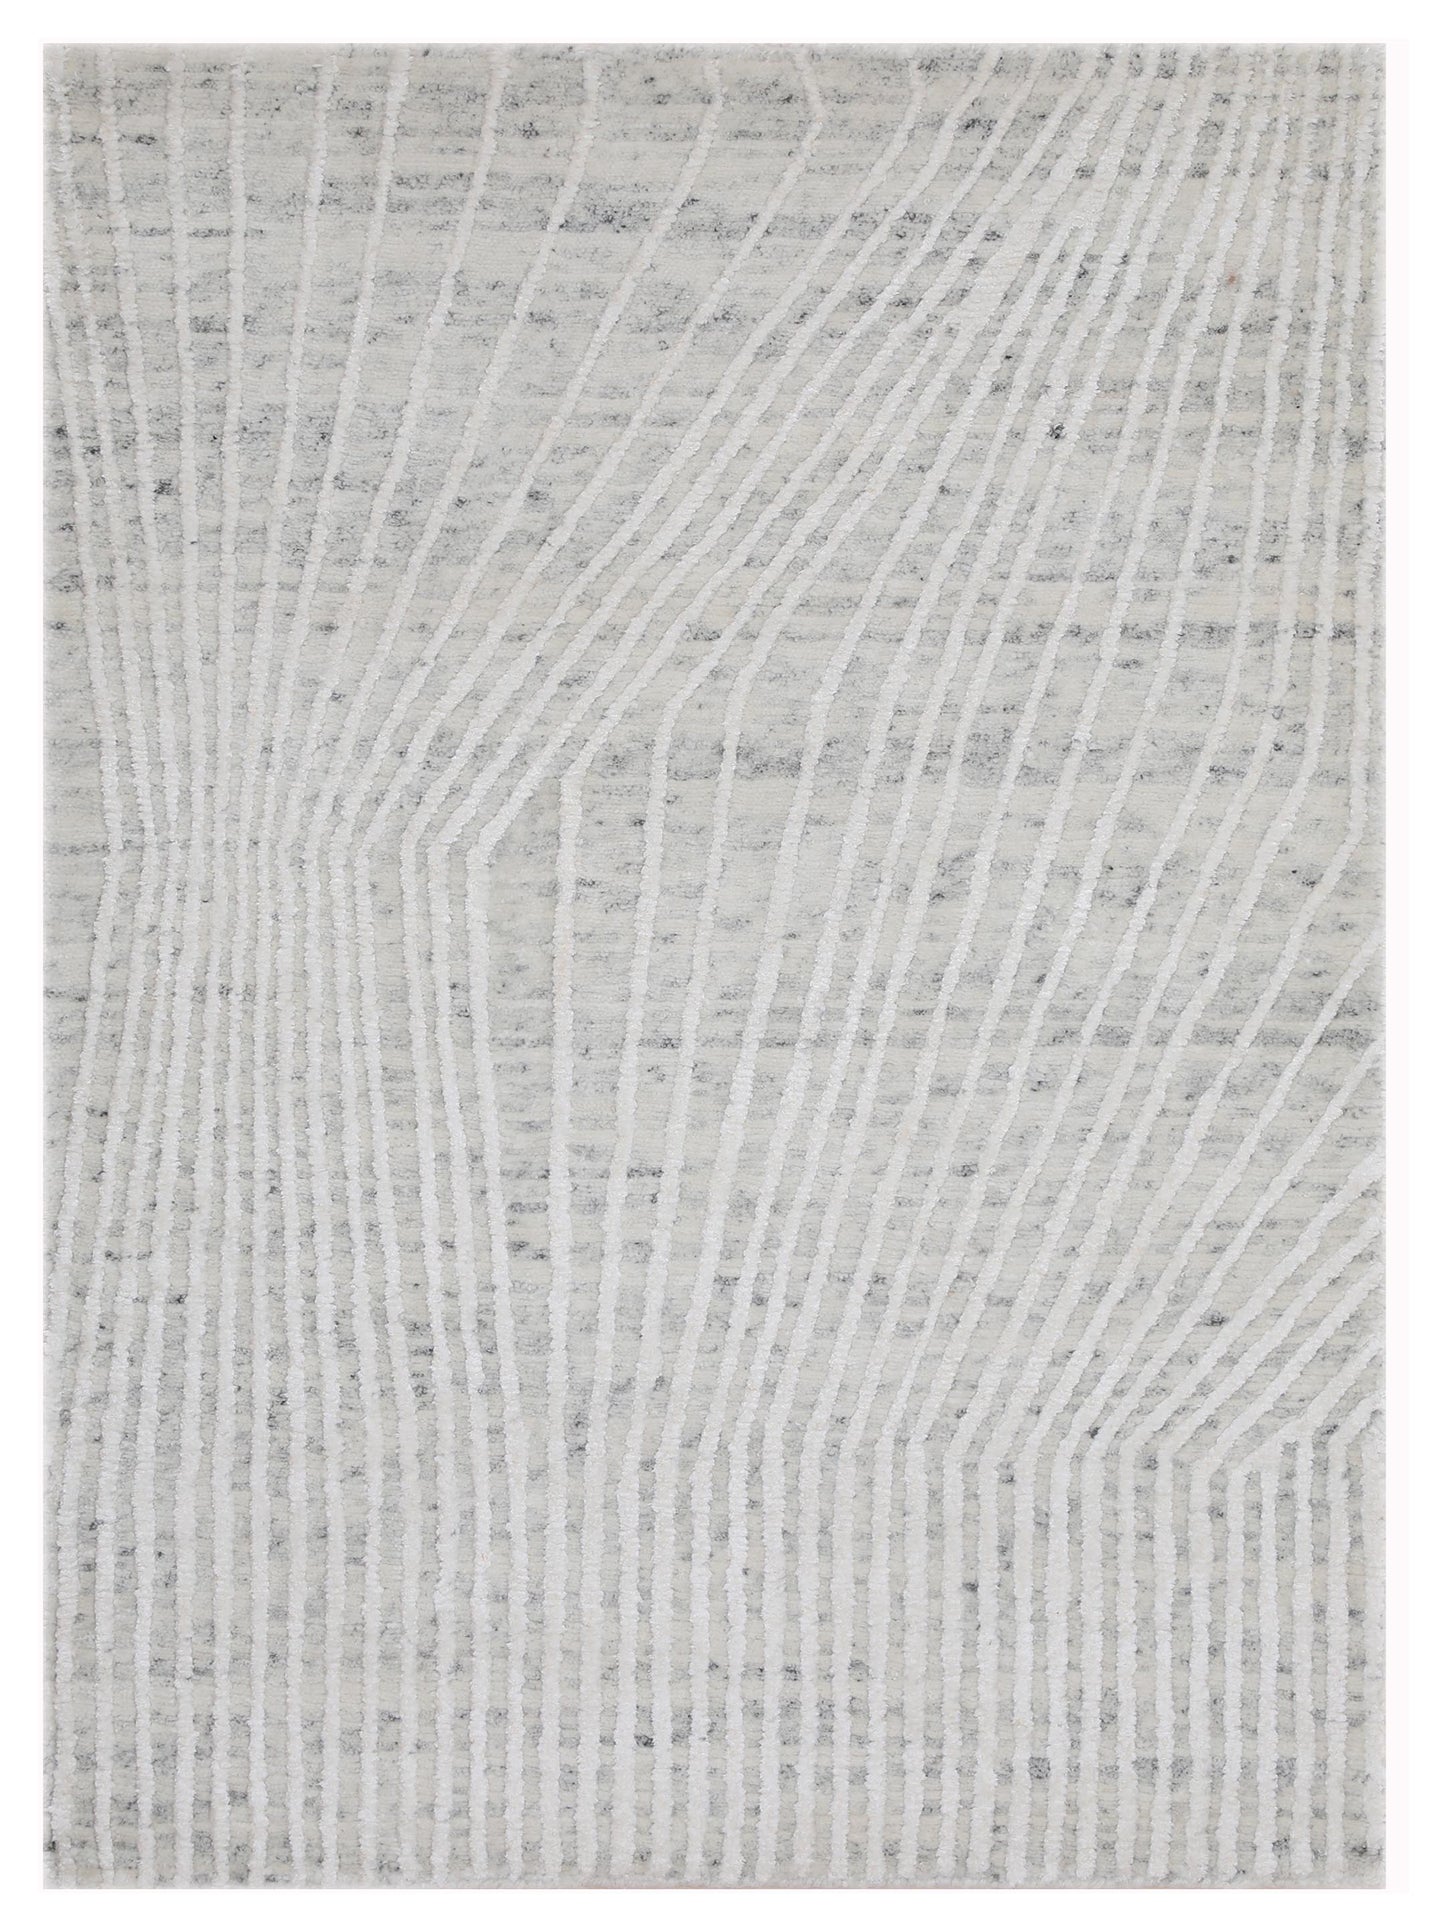 Artisan Mary MN-273 Ivory Contemporary Knotted Rug